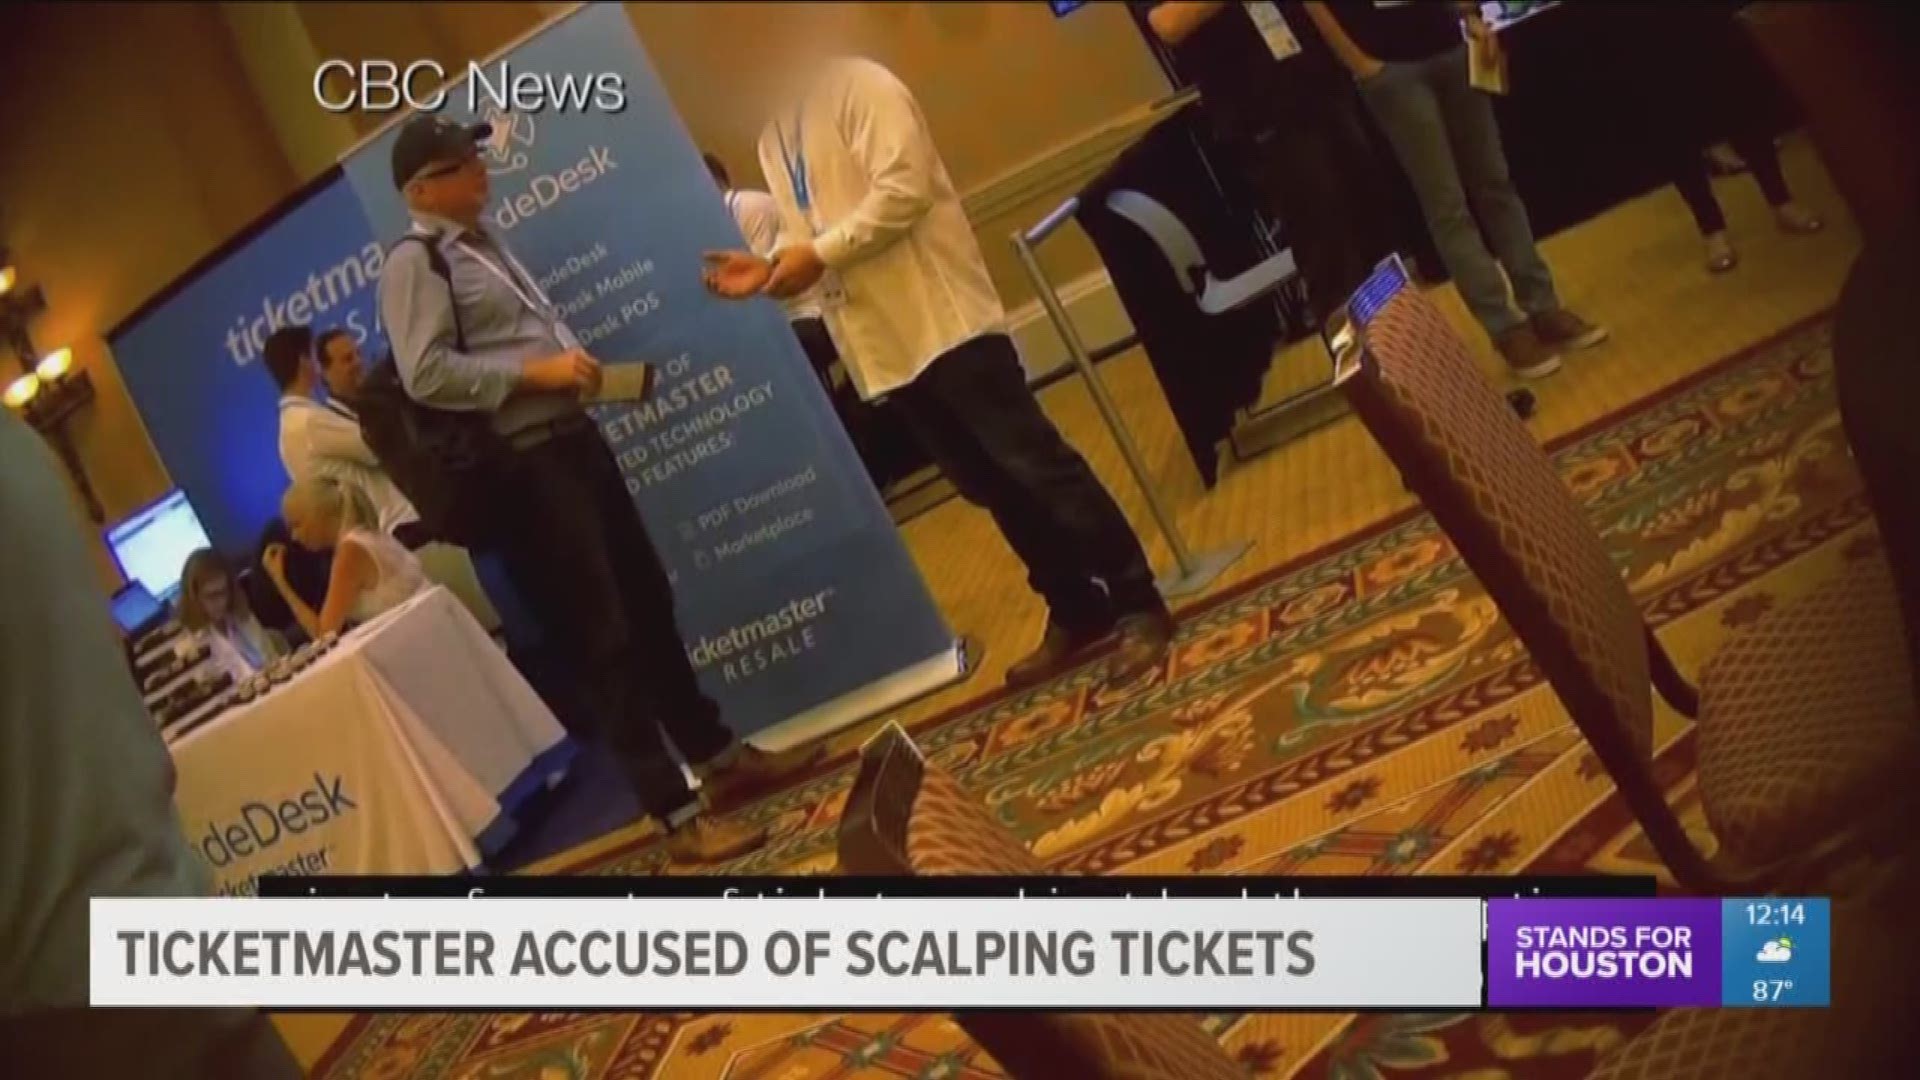 Ticketmaster is under investigation for scalping tickets and costing customers millions. 